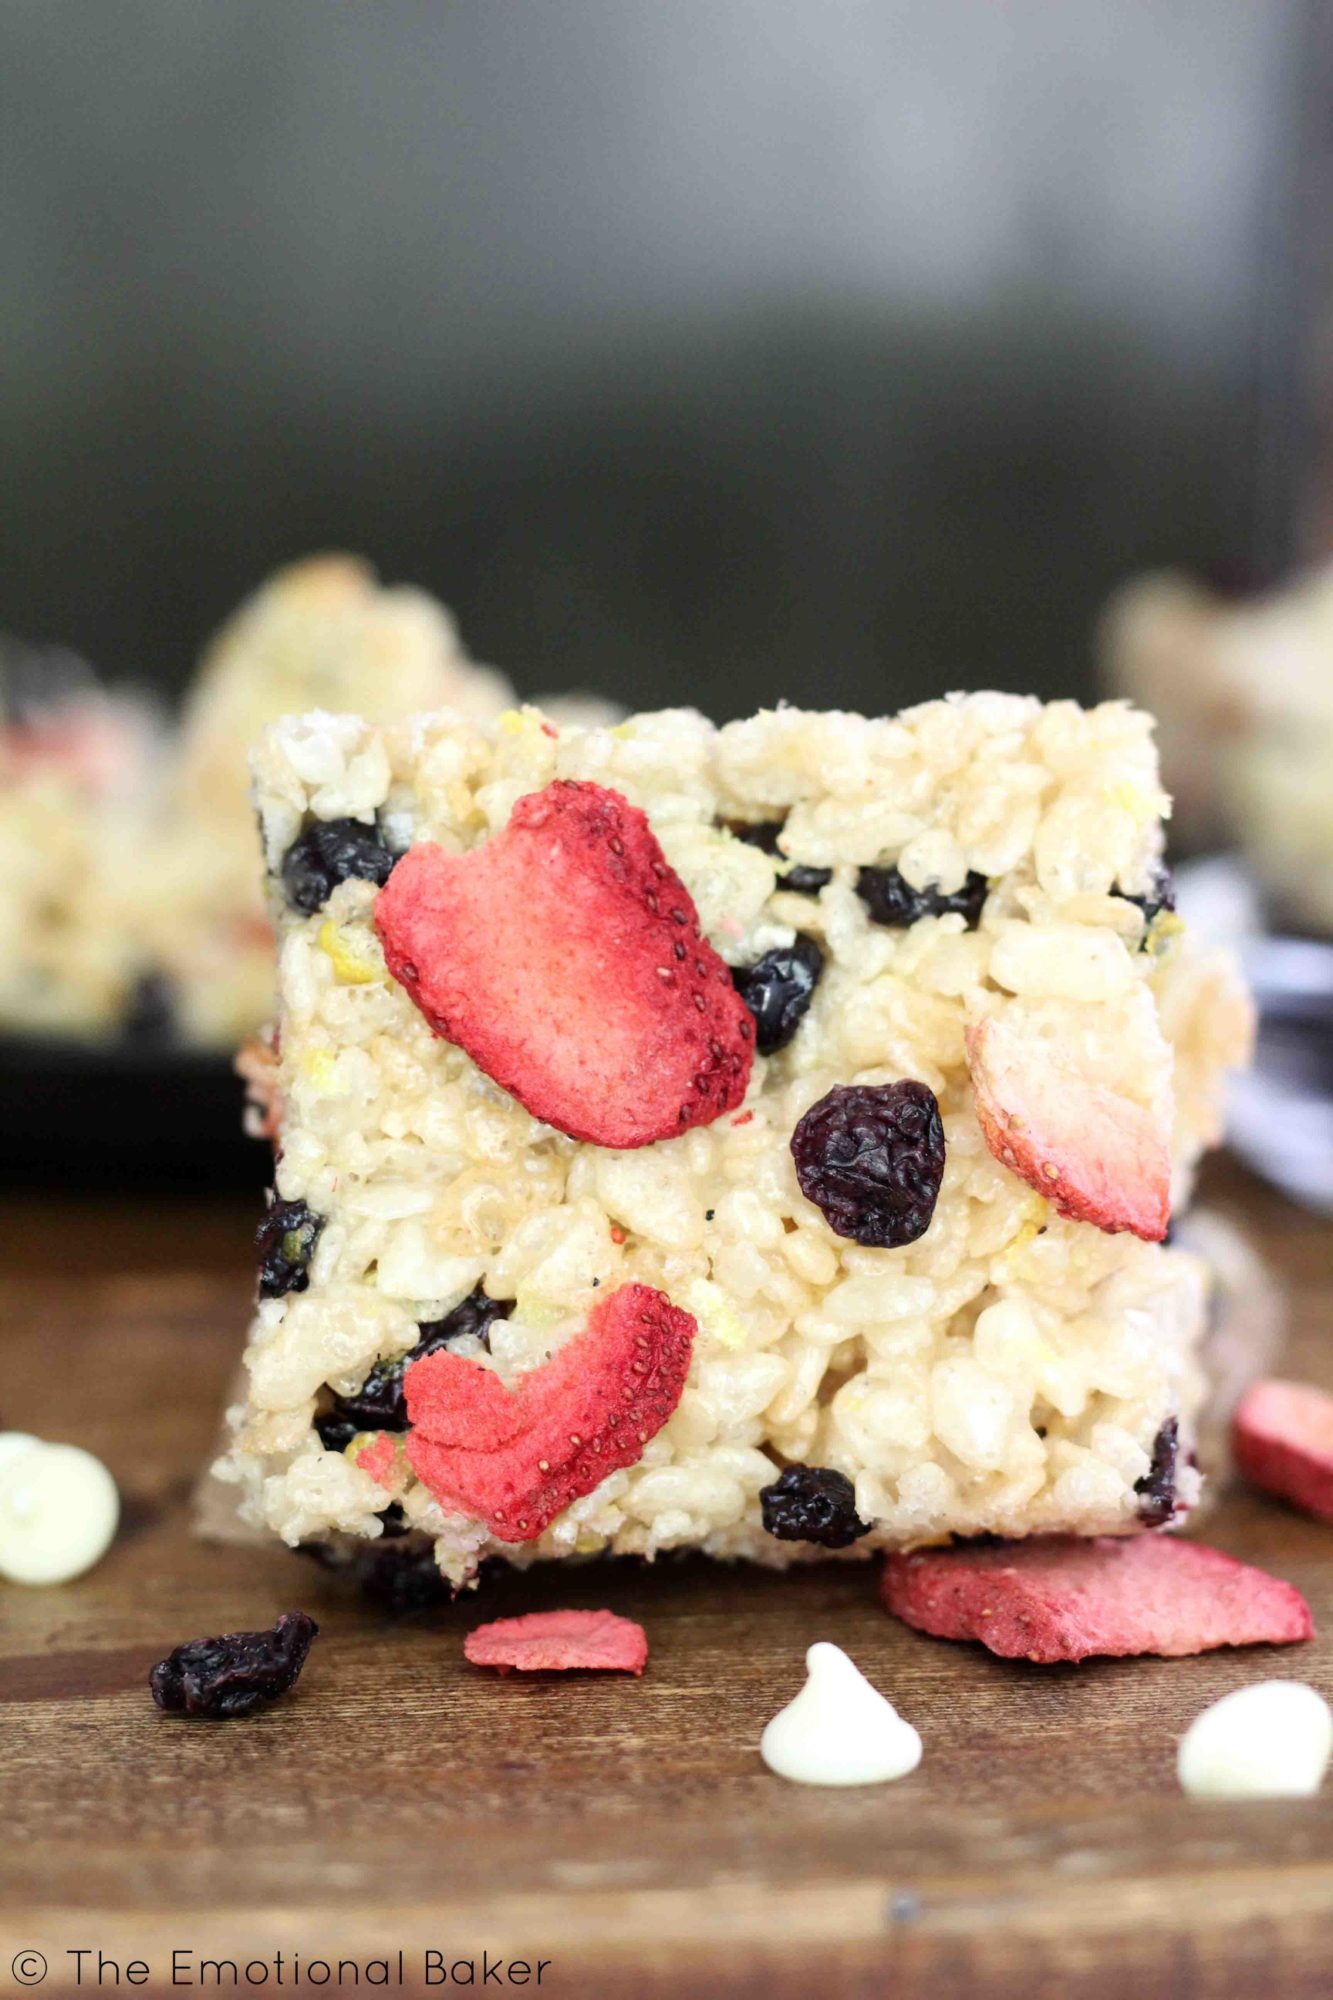 Rice Krispie Treats get an update with lemon zest, dried blueberries, freeze dried strawberries and white chocolate